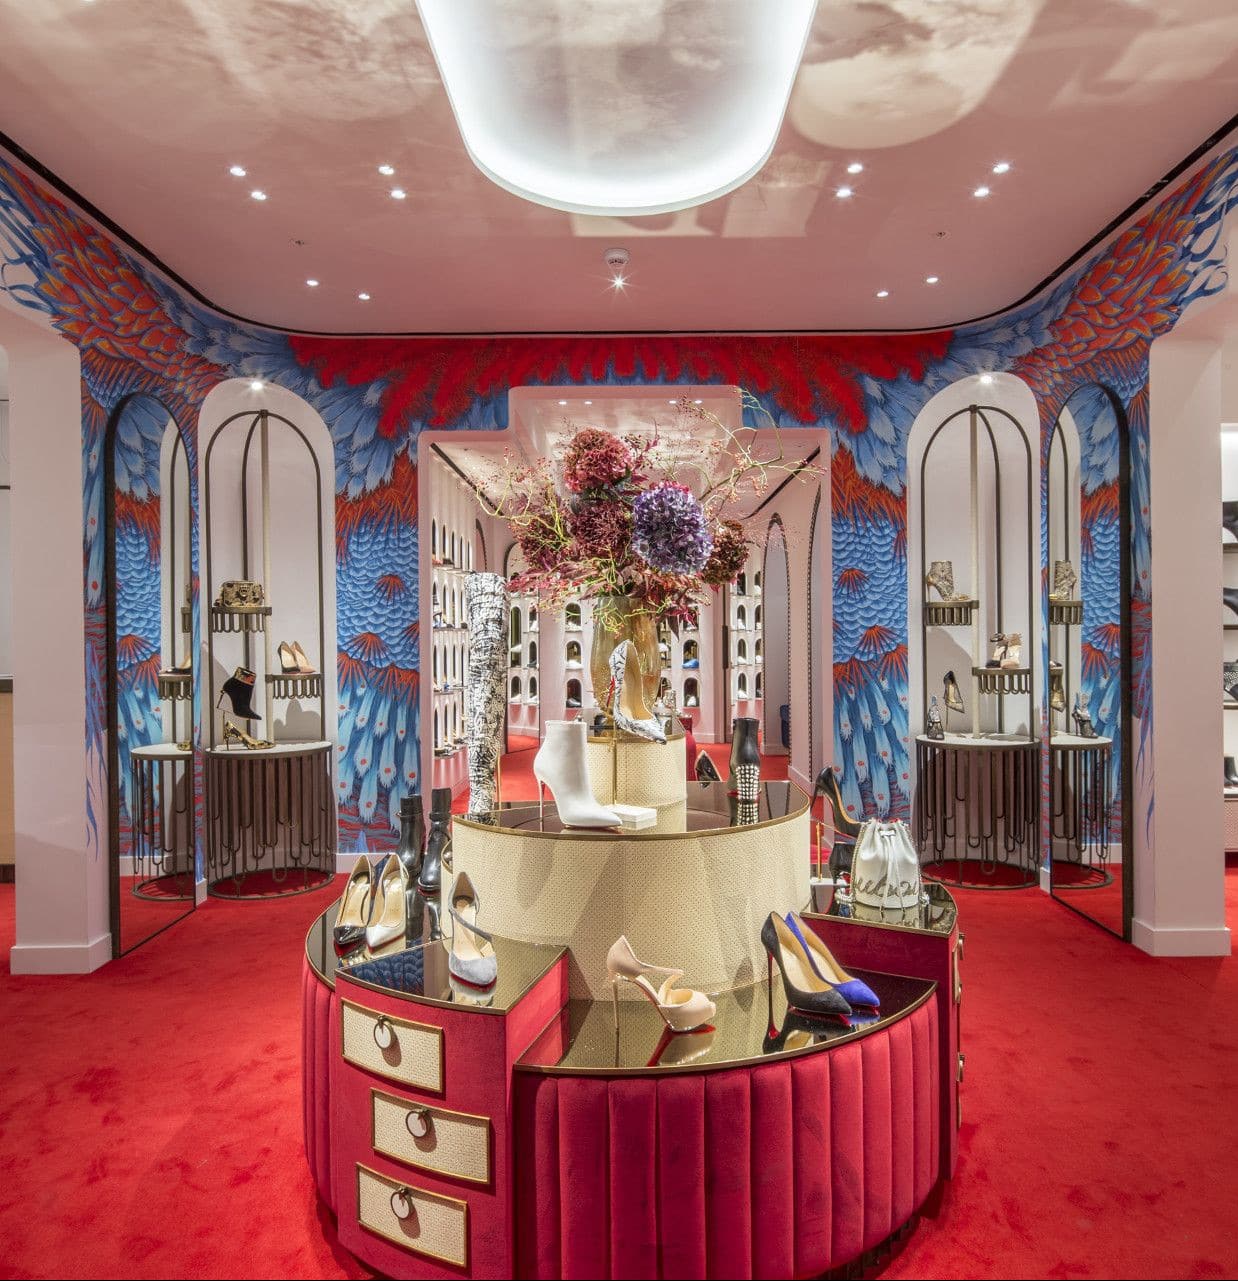 Louboutin Shop with interior design by moprojects shopfitting company